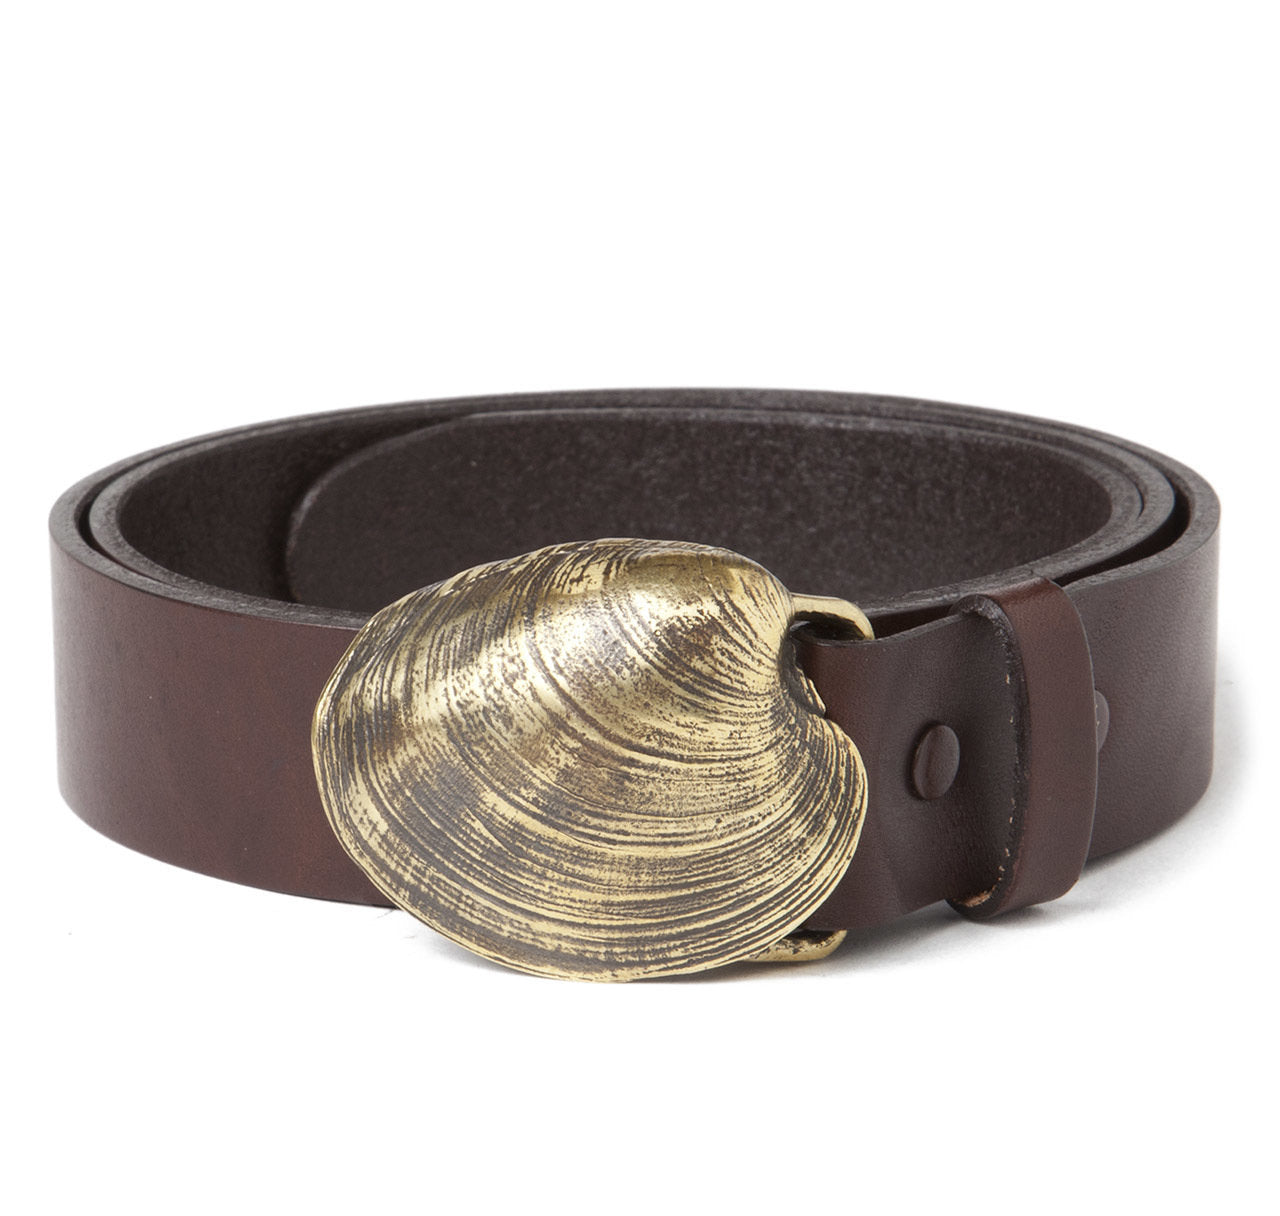 Quahog Shell Buckle with Brown Leather Belt